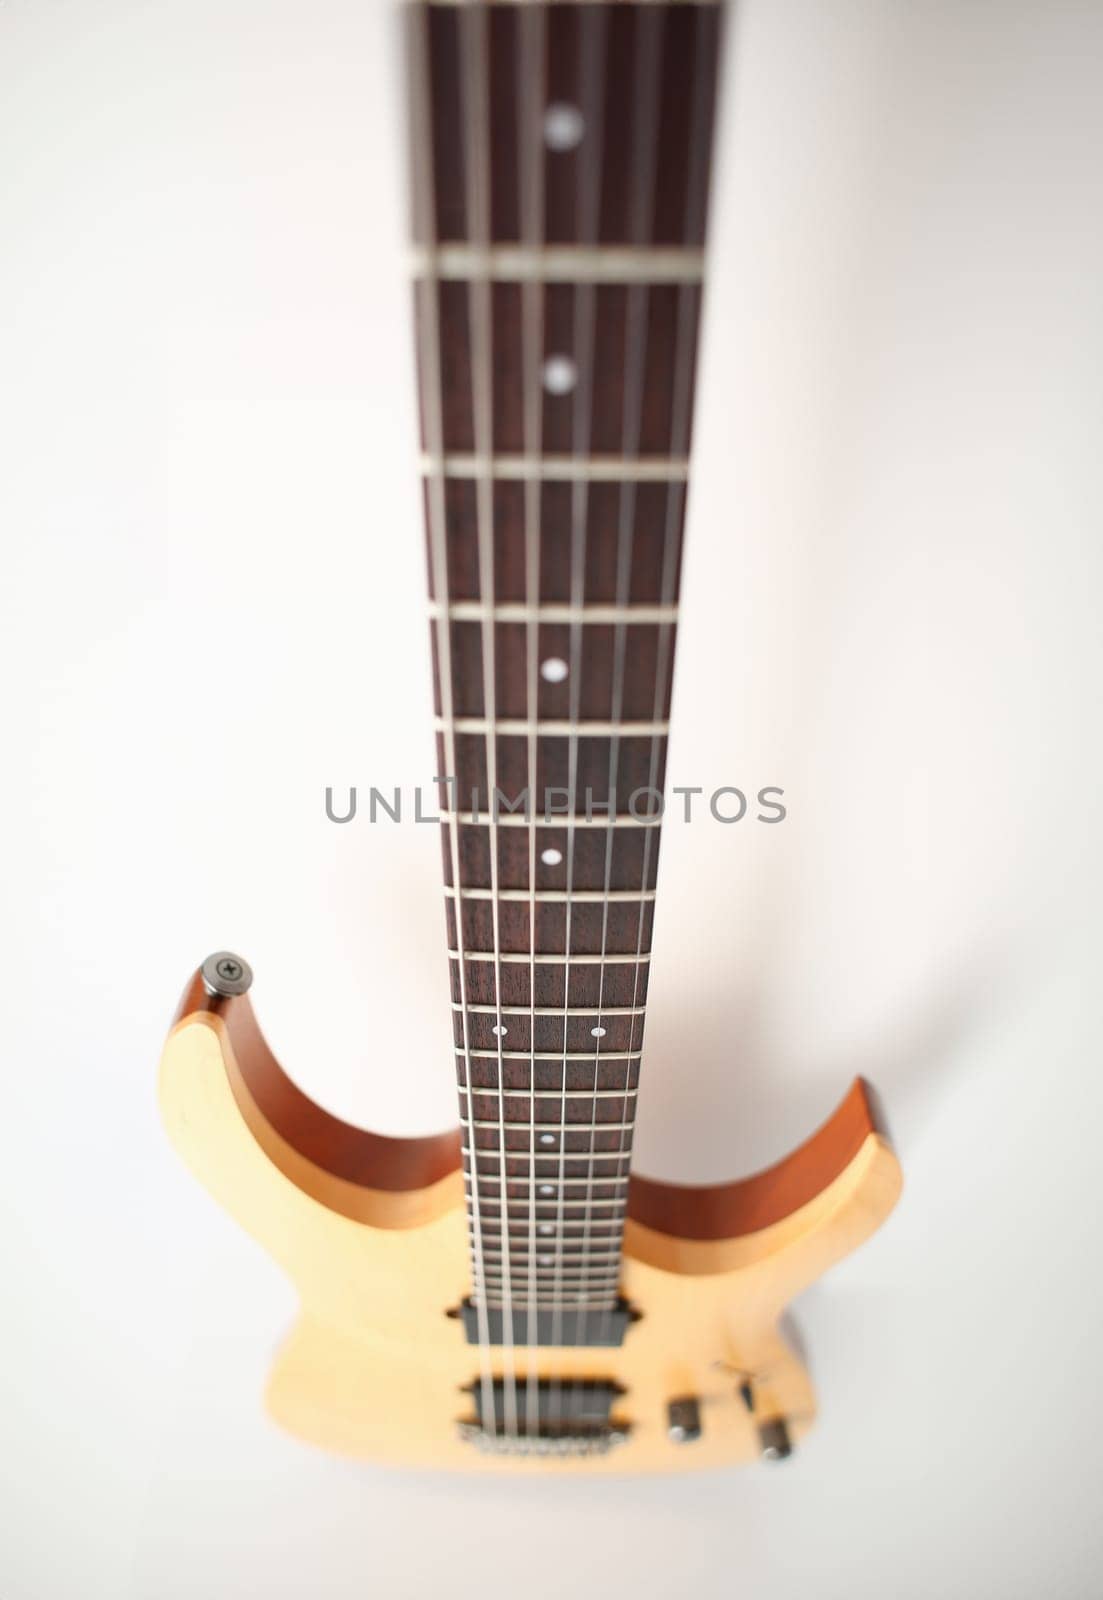 Classic shape wooden electric guitar with rosewood neck closeup. Six stringed learning lesson musician school education art leisure electrical vintage stage wood guitar concept